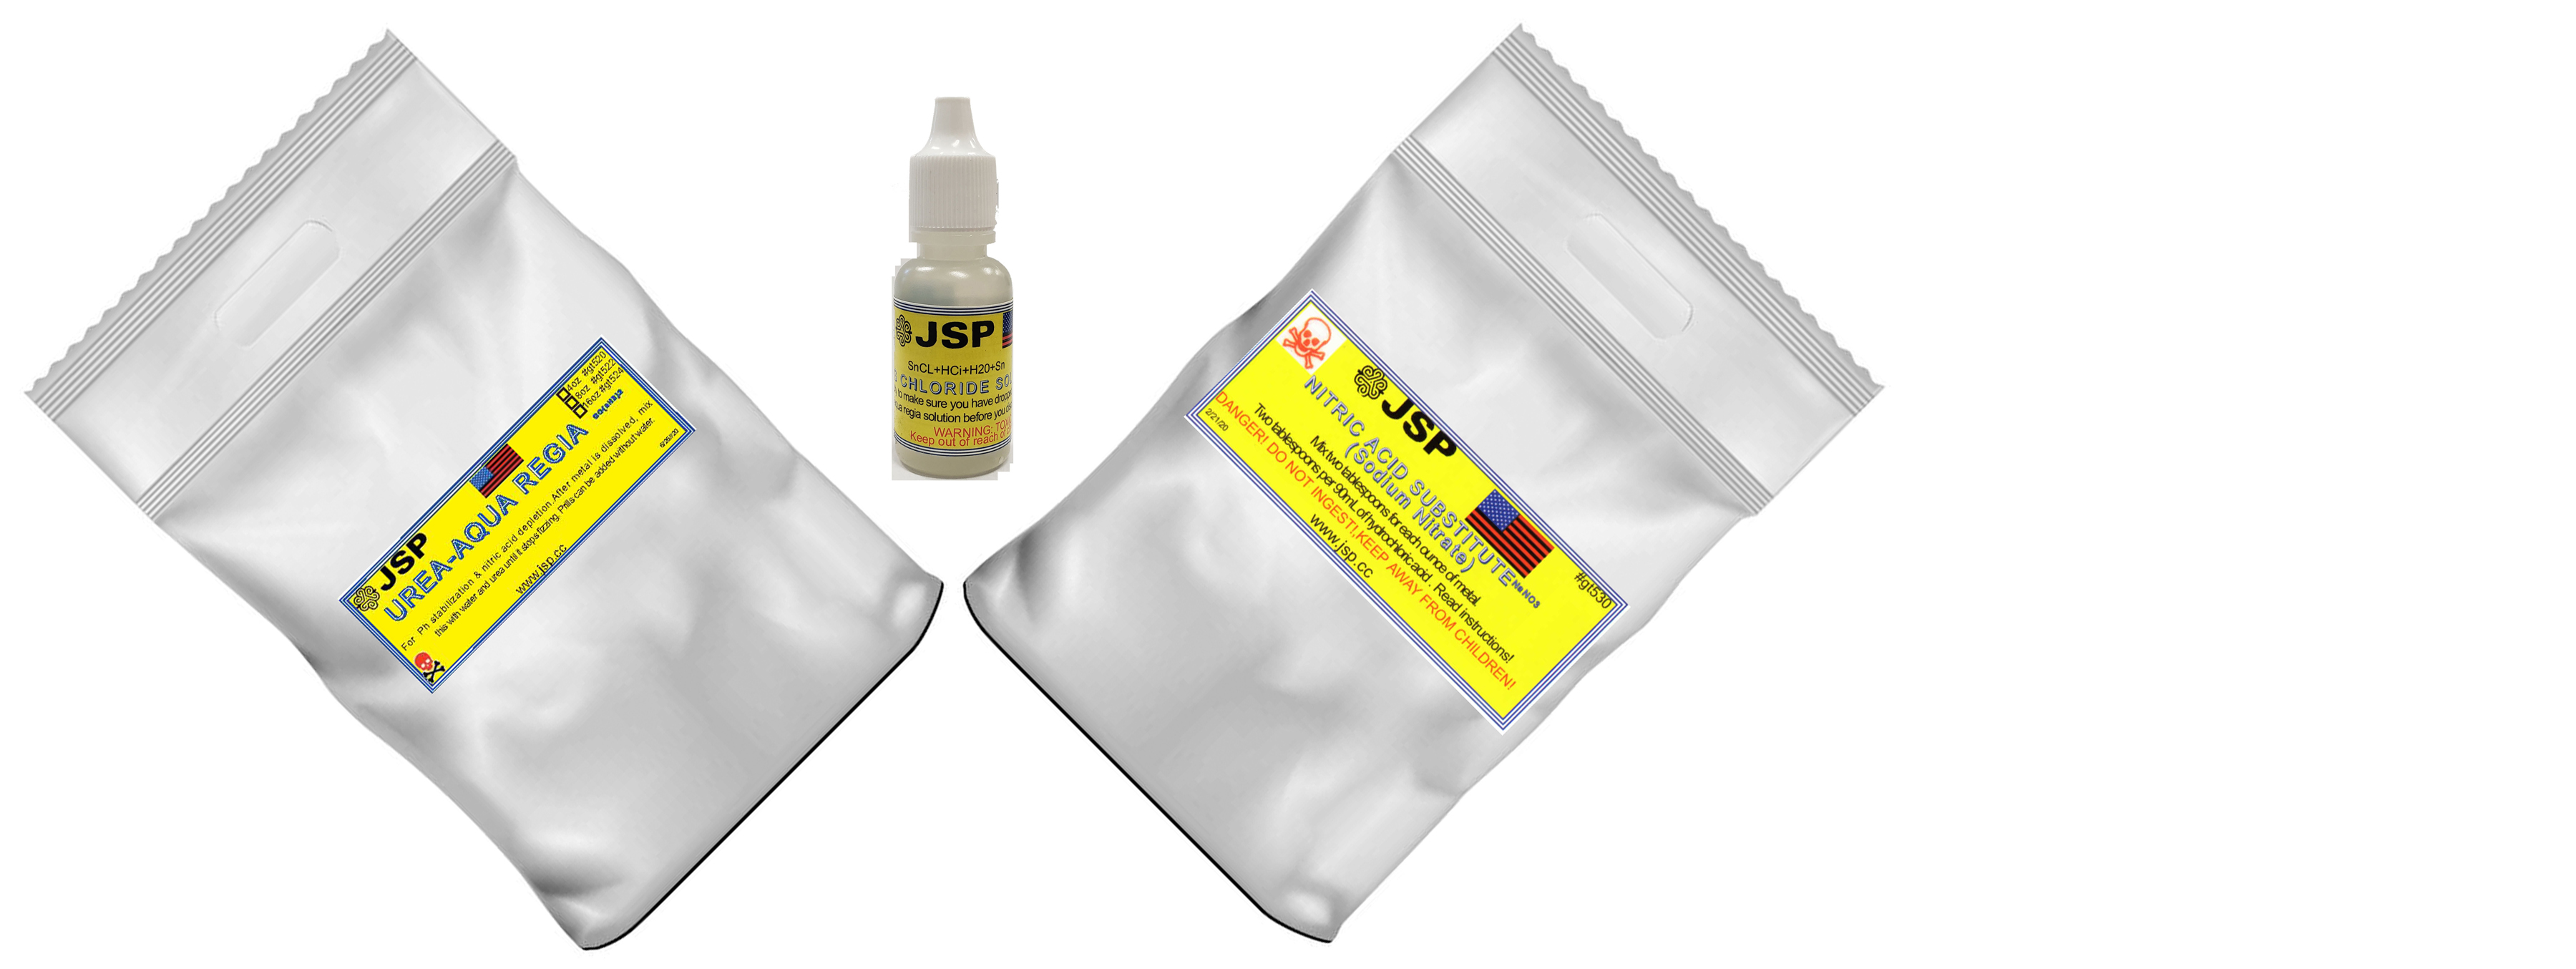 Aqua regia gold refining supply kit, 2x 1/4lb bags +Stannous Chloride with instructions.